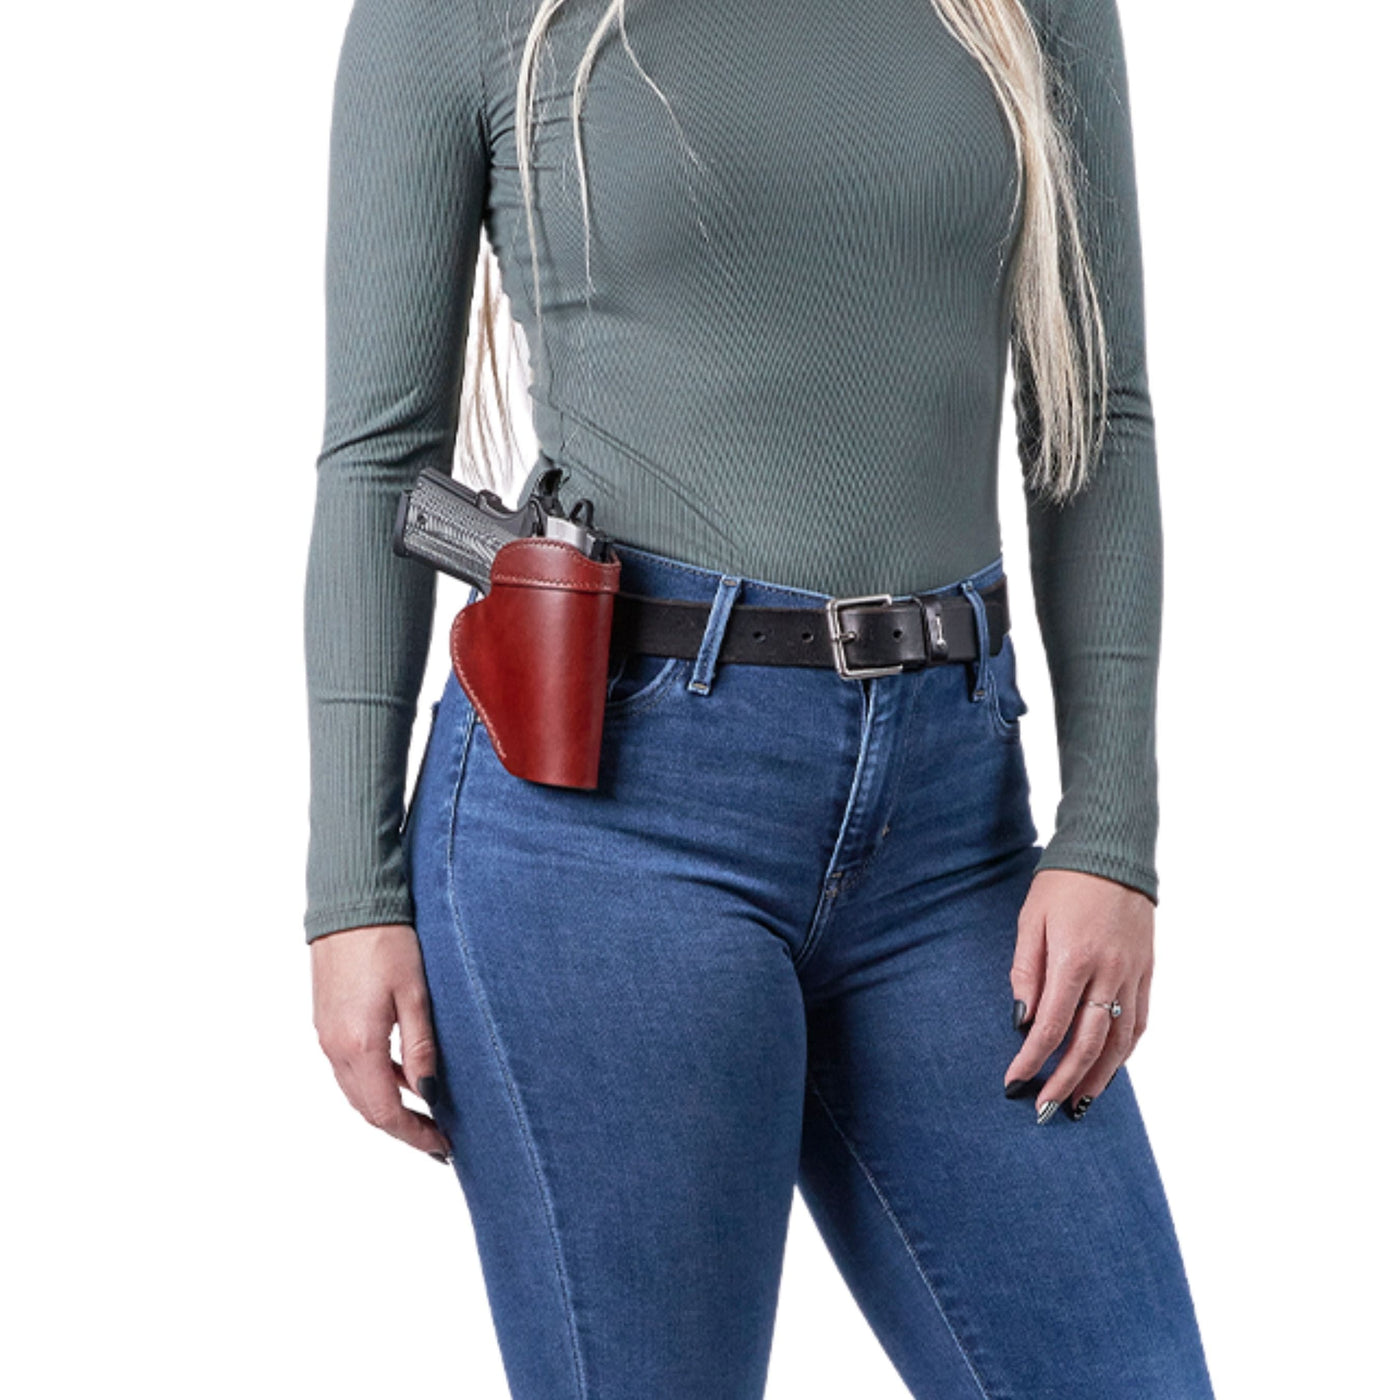 Unisex Inside Waistband Left-Handed Leather Holster by DS Conceal